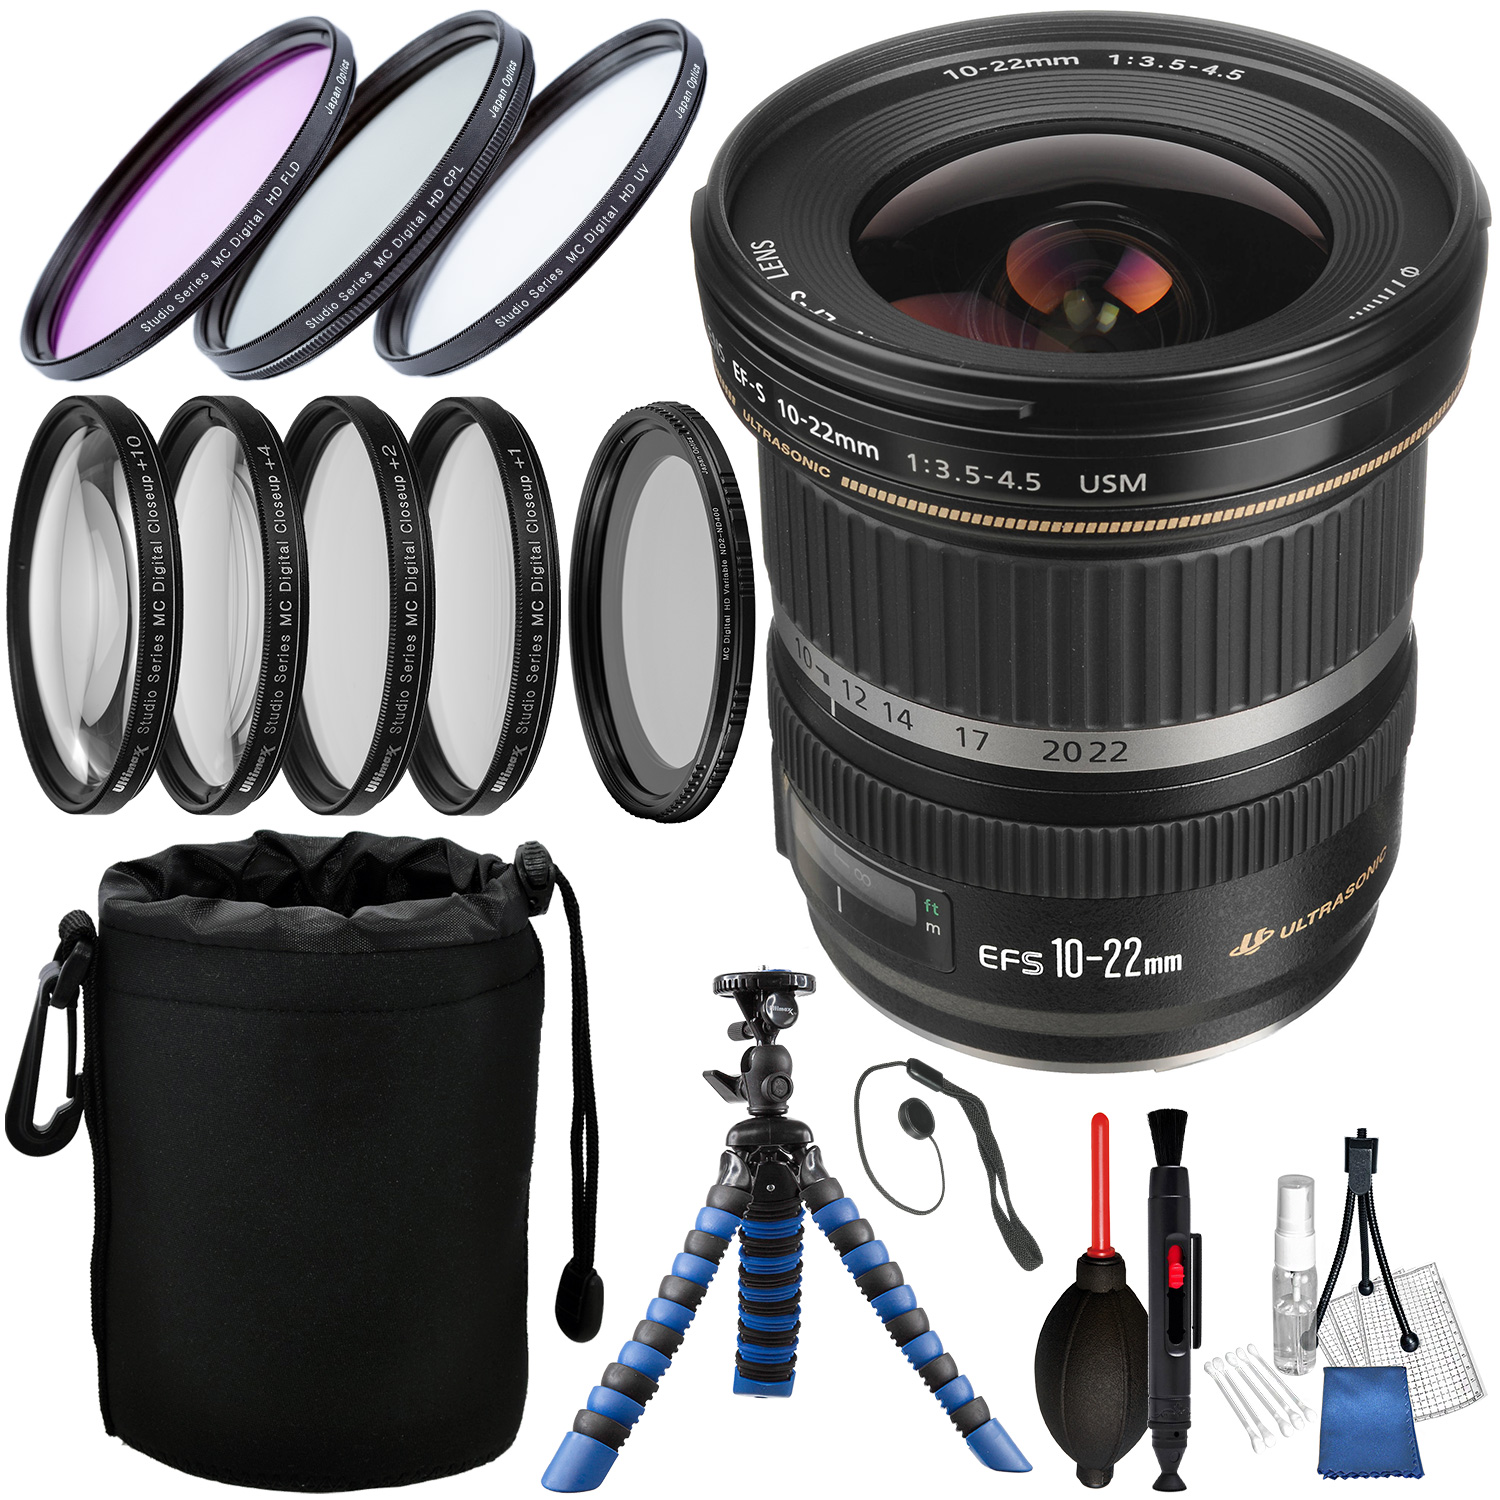 Canon EF-S 10-22mm f/3.5-4.5 USM Lens with Accessory Bundle